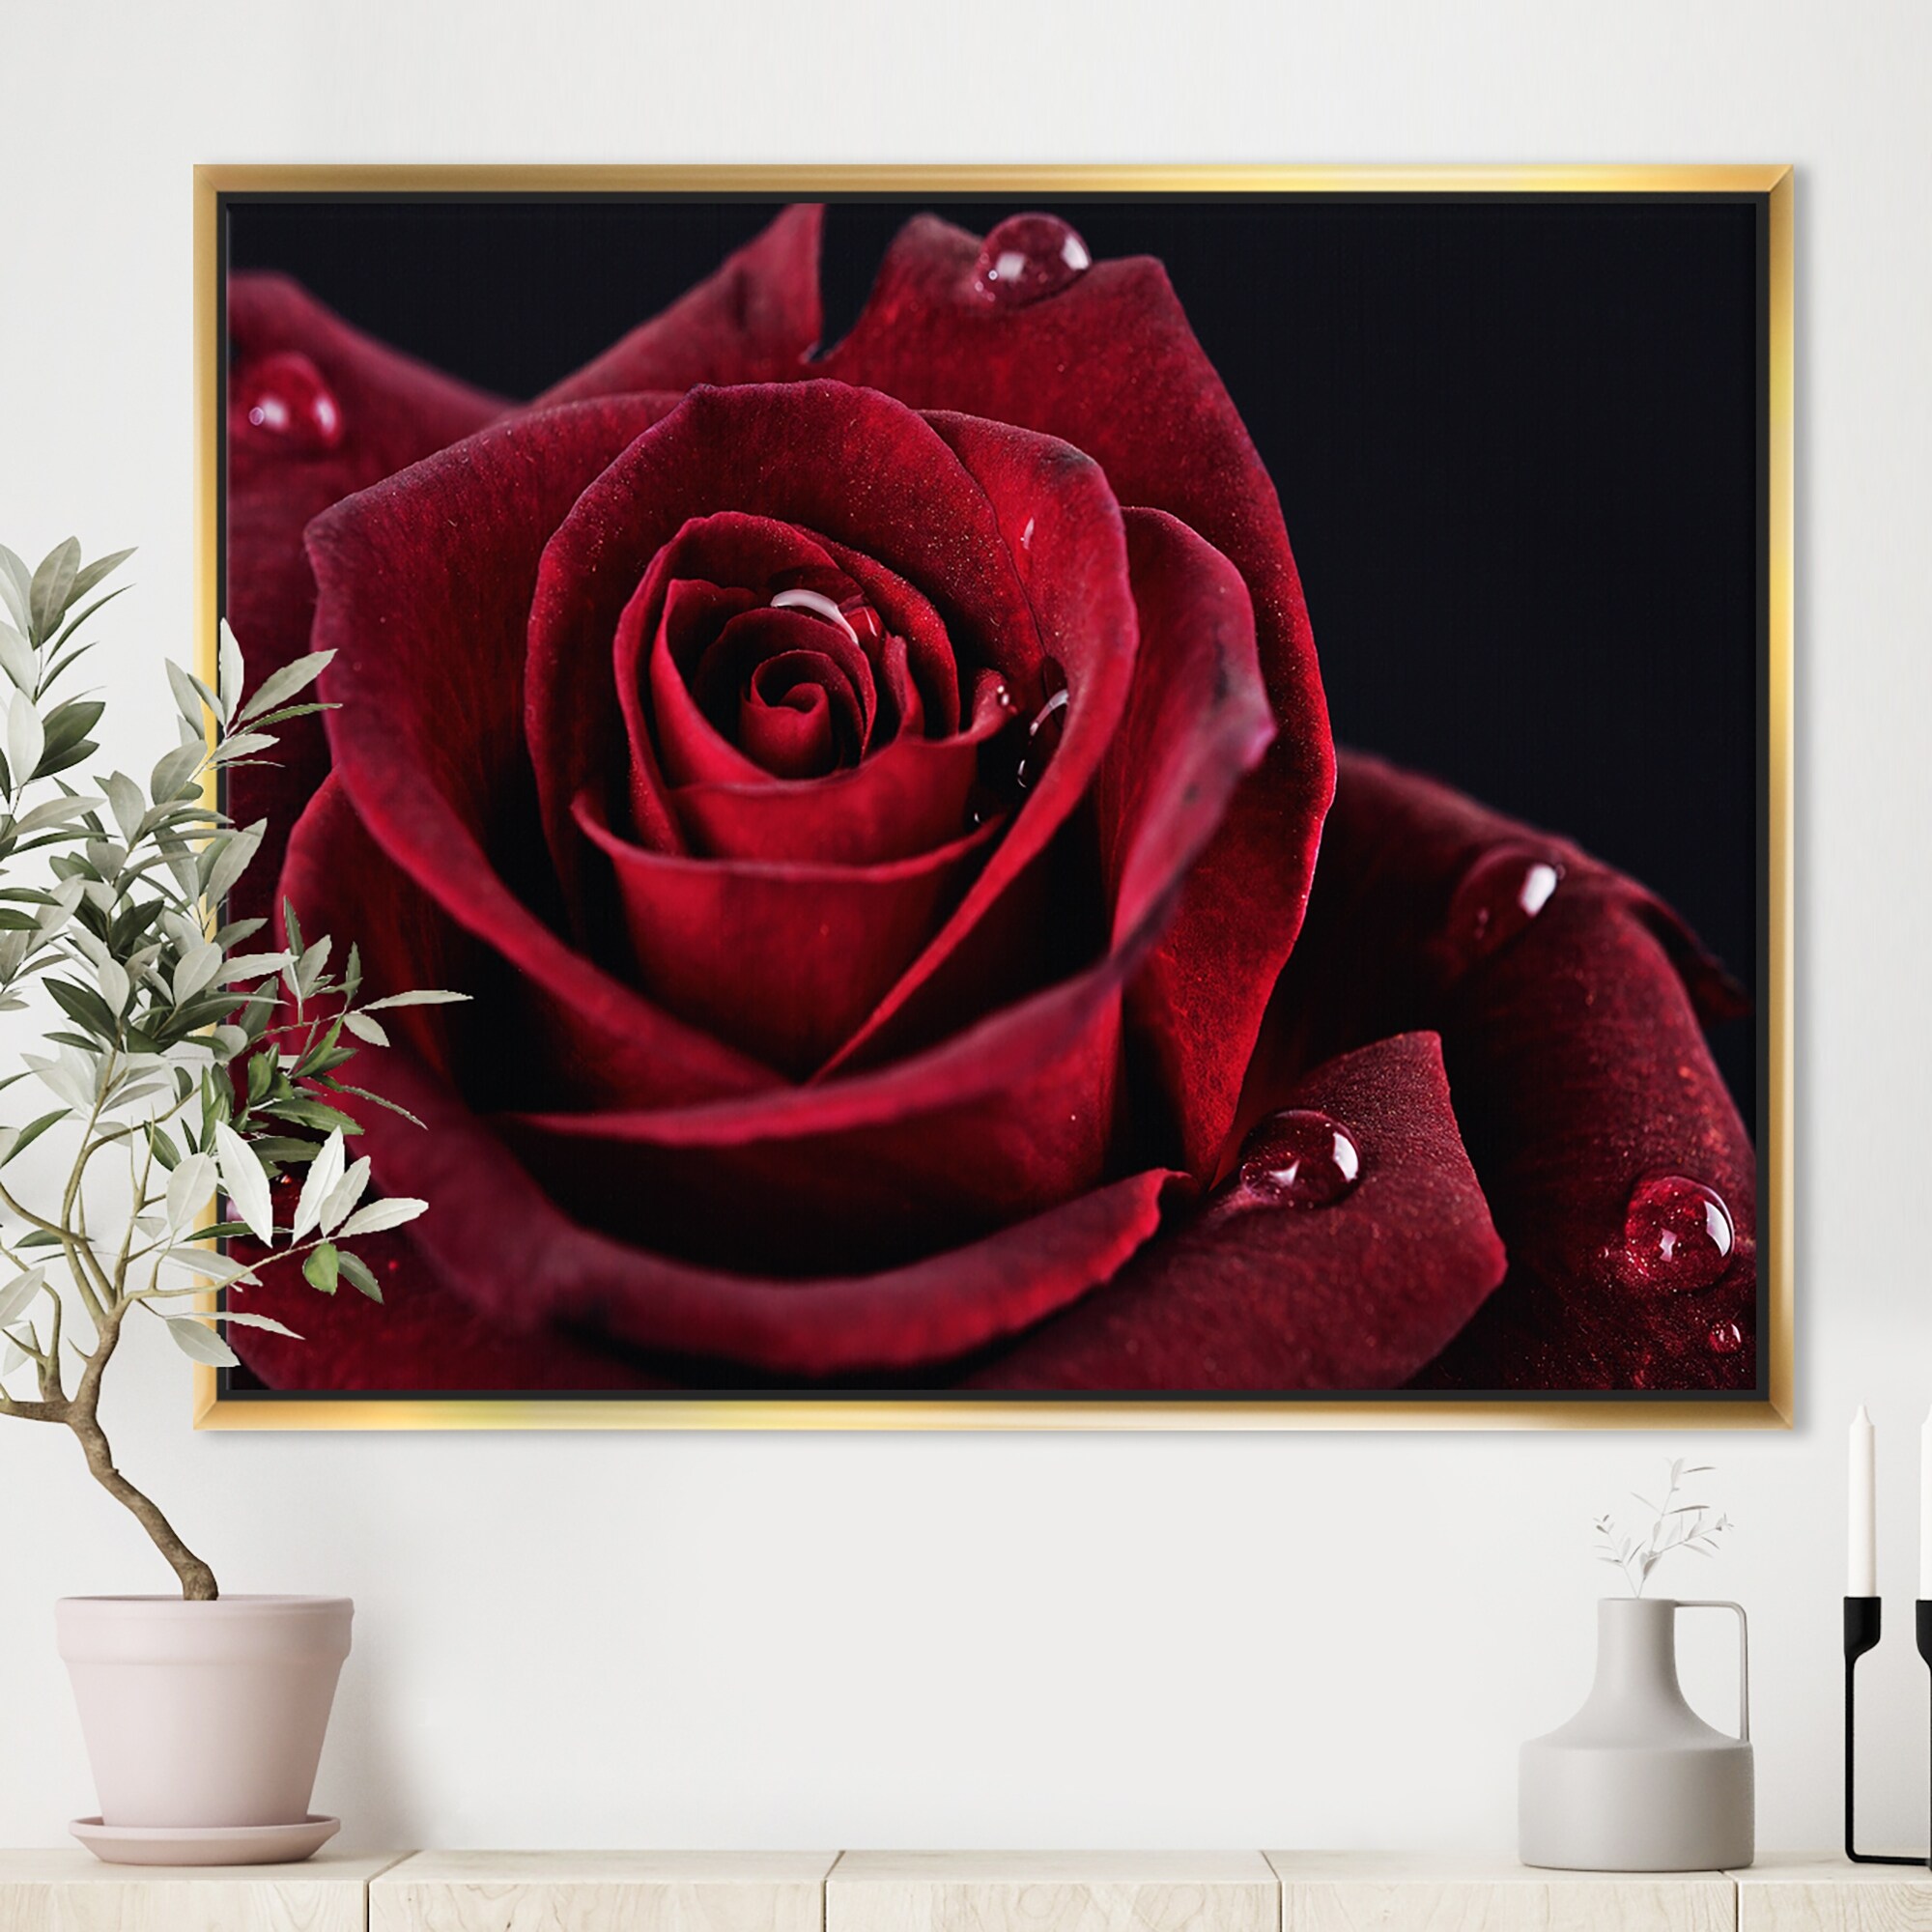 Red Rose Canvas Giclee Print Picture Unframed Home Decor Wall Art 